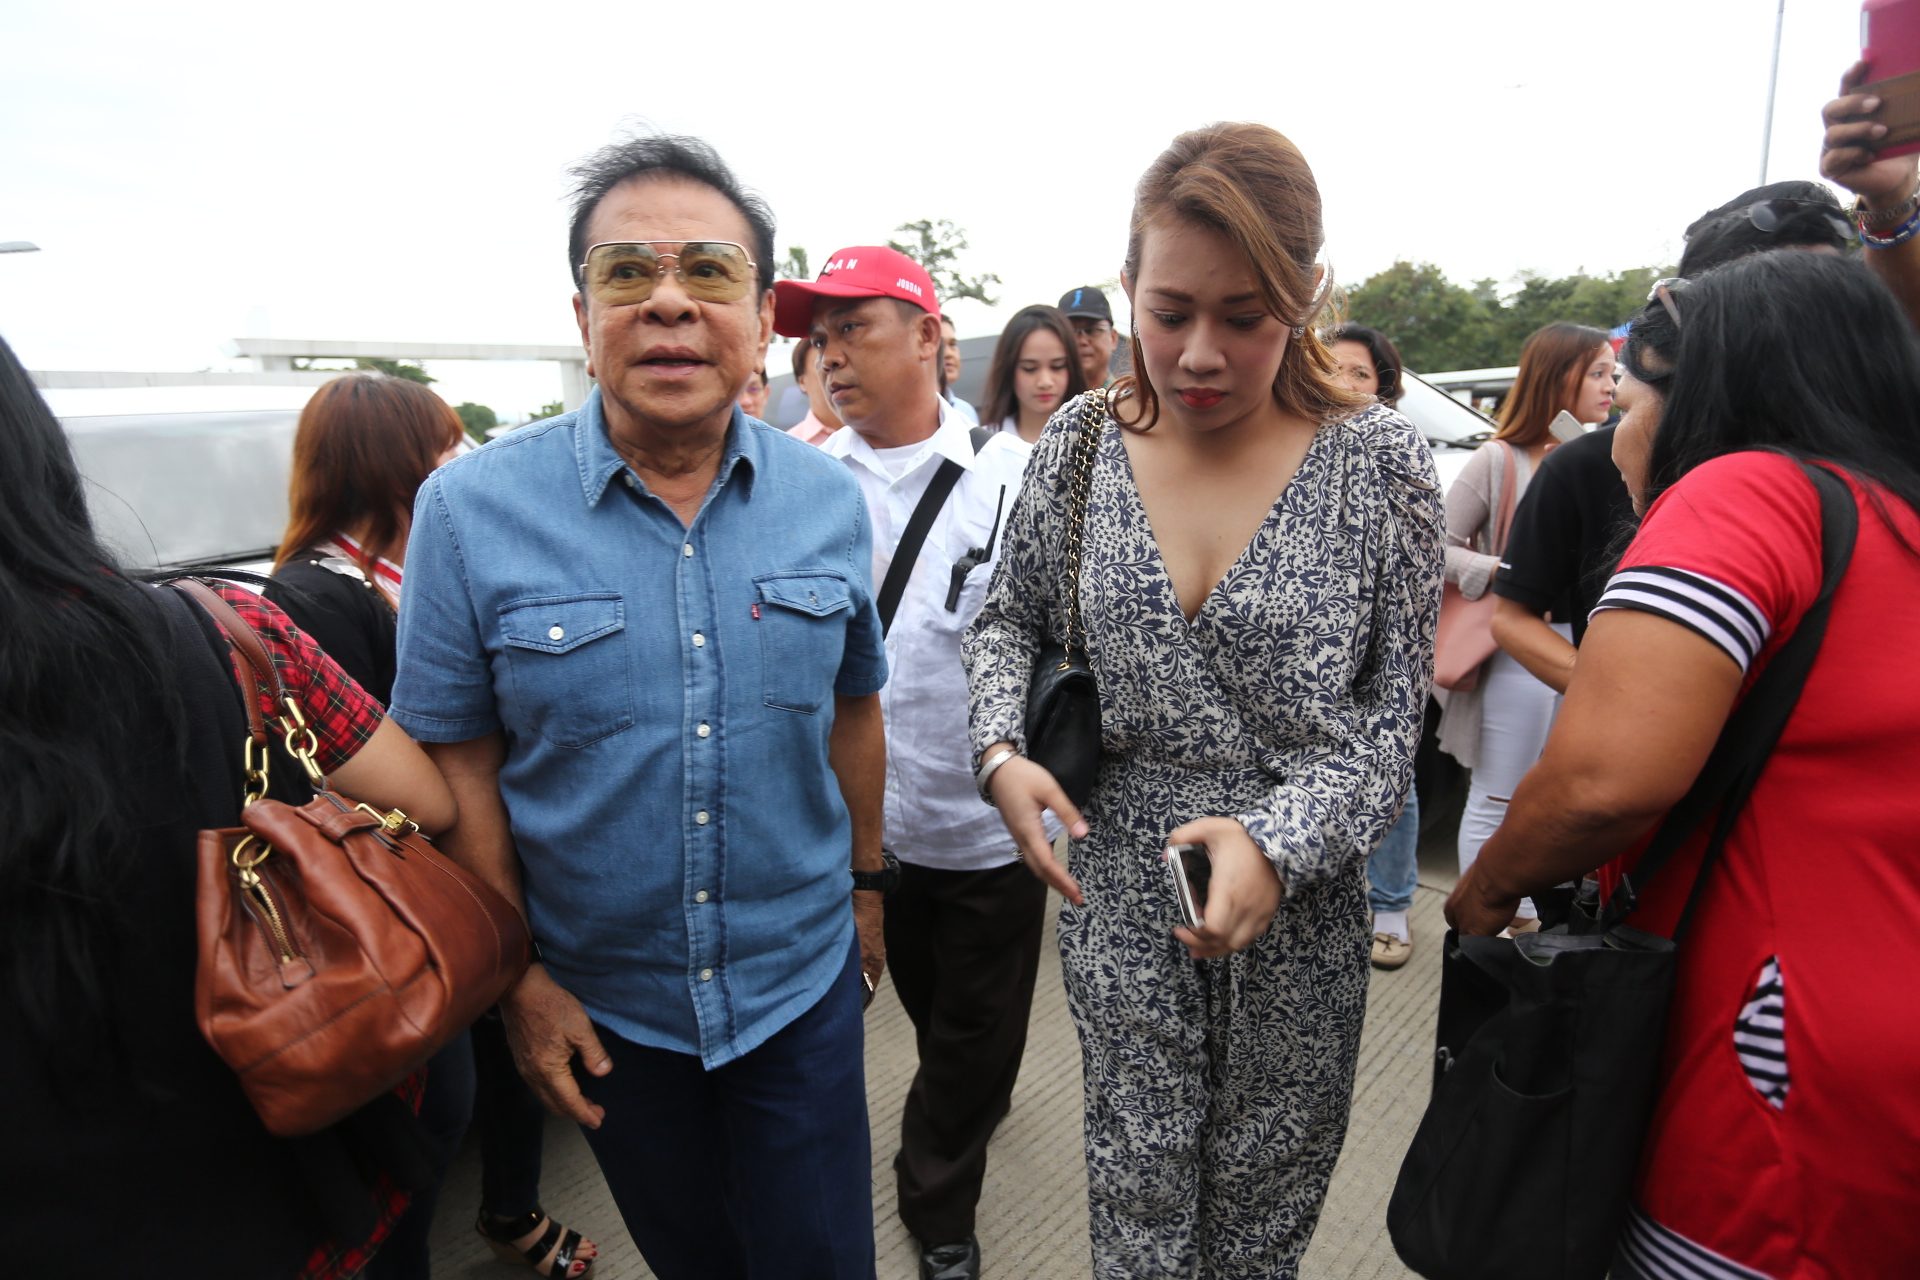 WHO'S WHO. Chavit Singson arrives at the Matina Enclaves in Davao City to meet with President-elect Rodrigo Duterte on May 16. Photo by Manman Dejeto/Rappler   